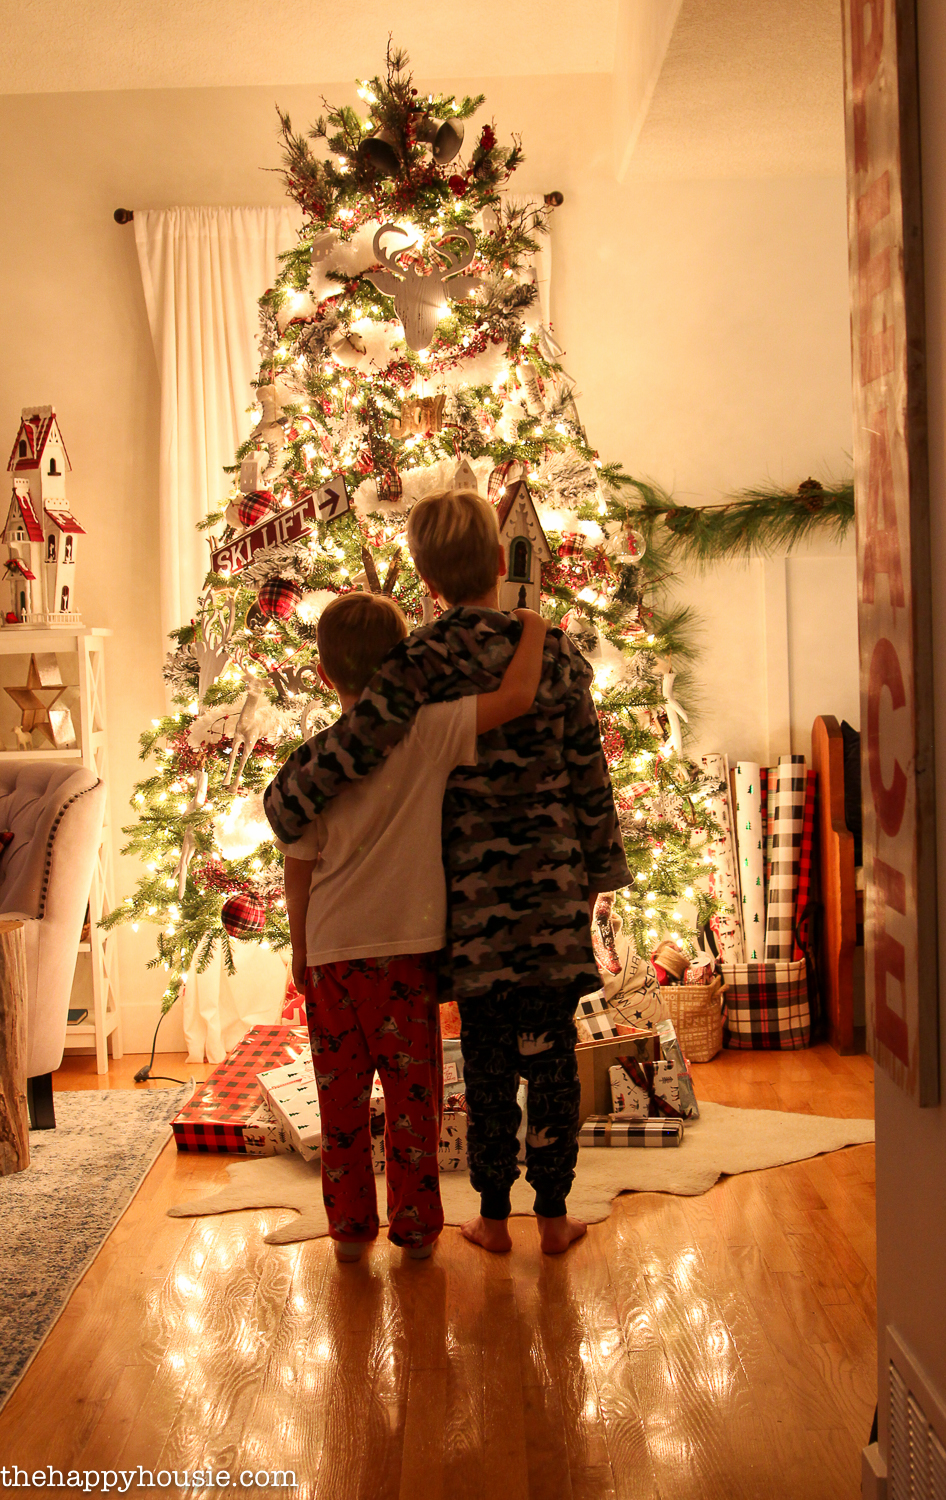 Two boys with their arms around each other standing in front of the Christmas tree.